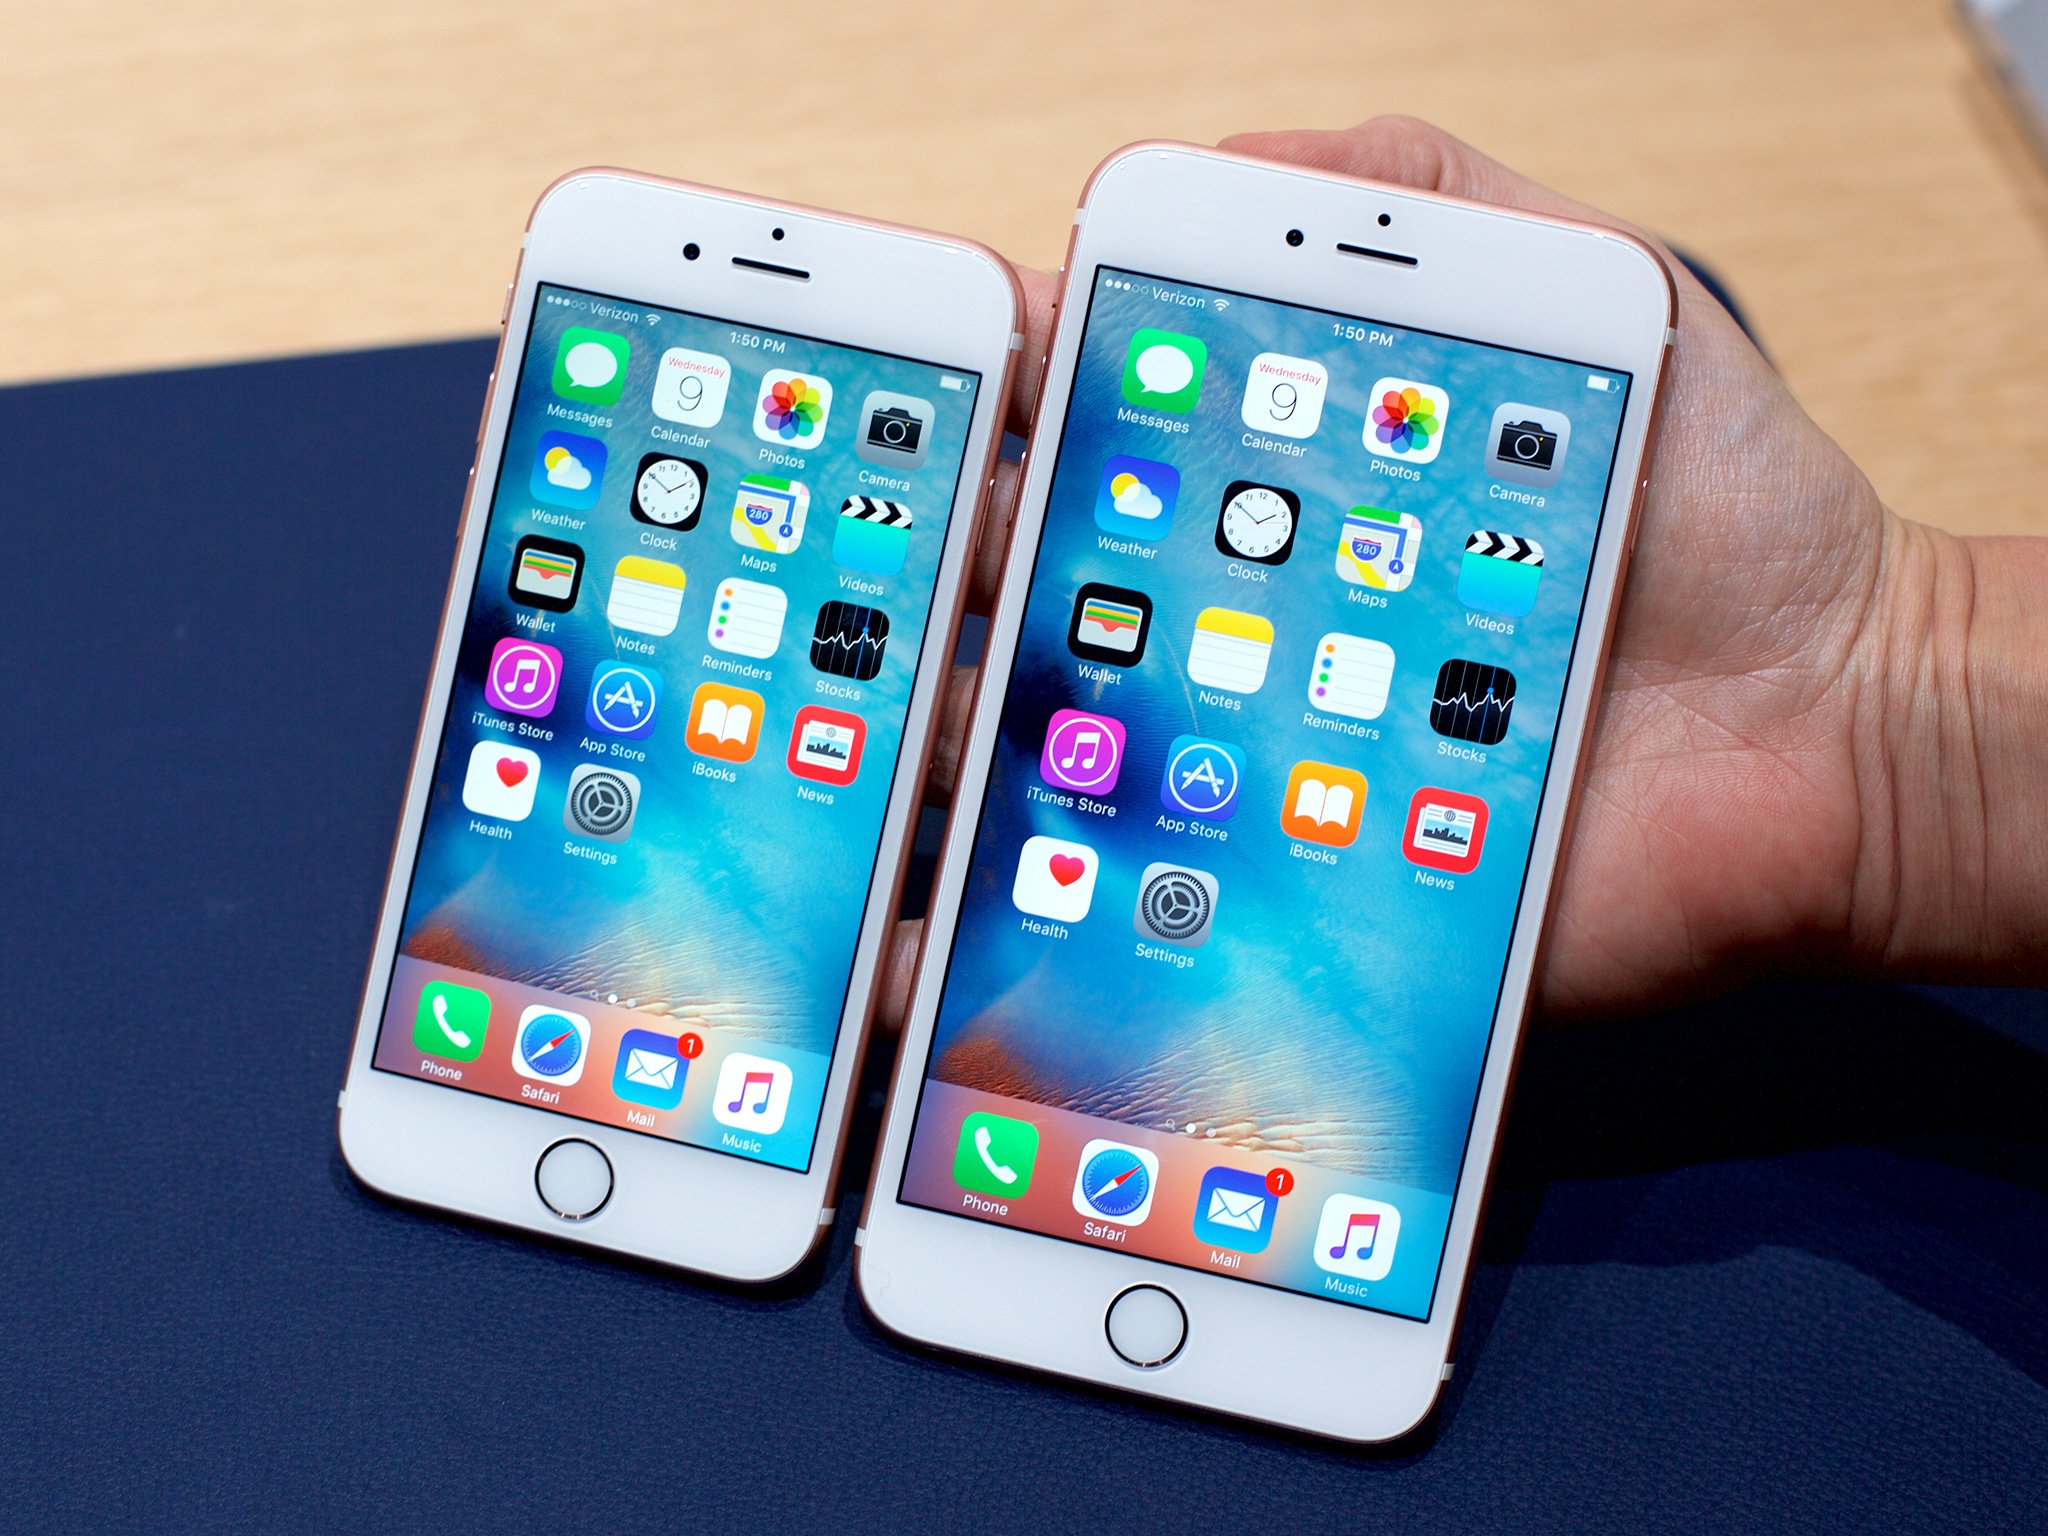 What iPhone screen size should you get 4inches, 4.7inches, or 5.5